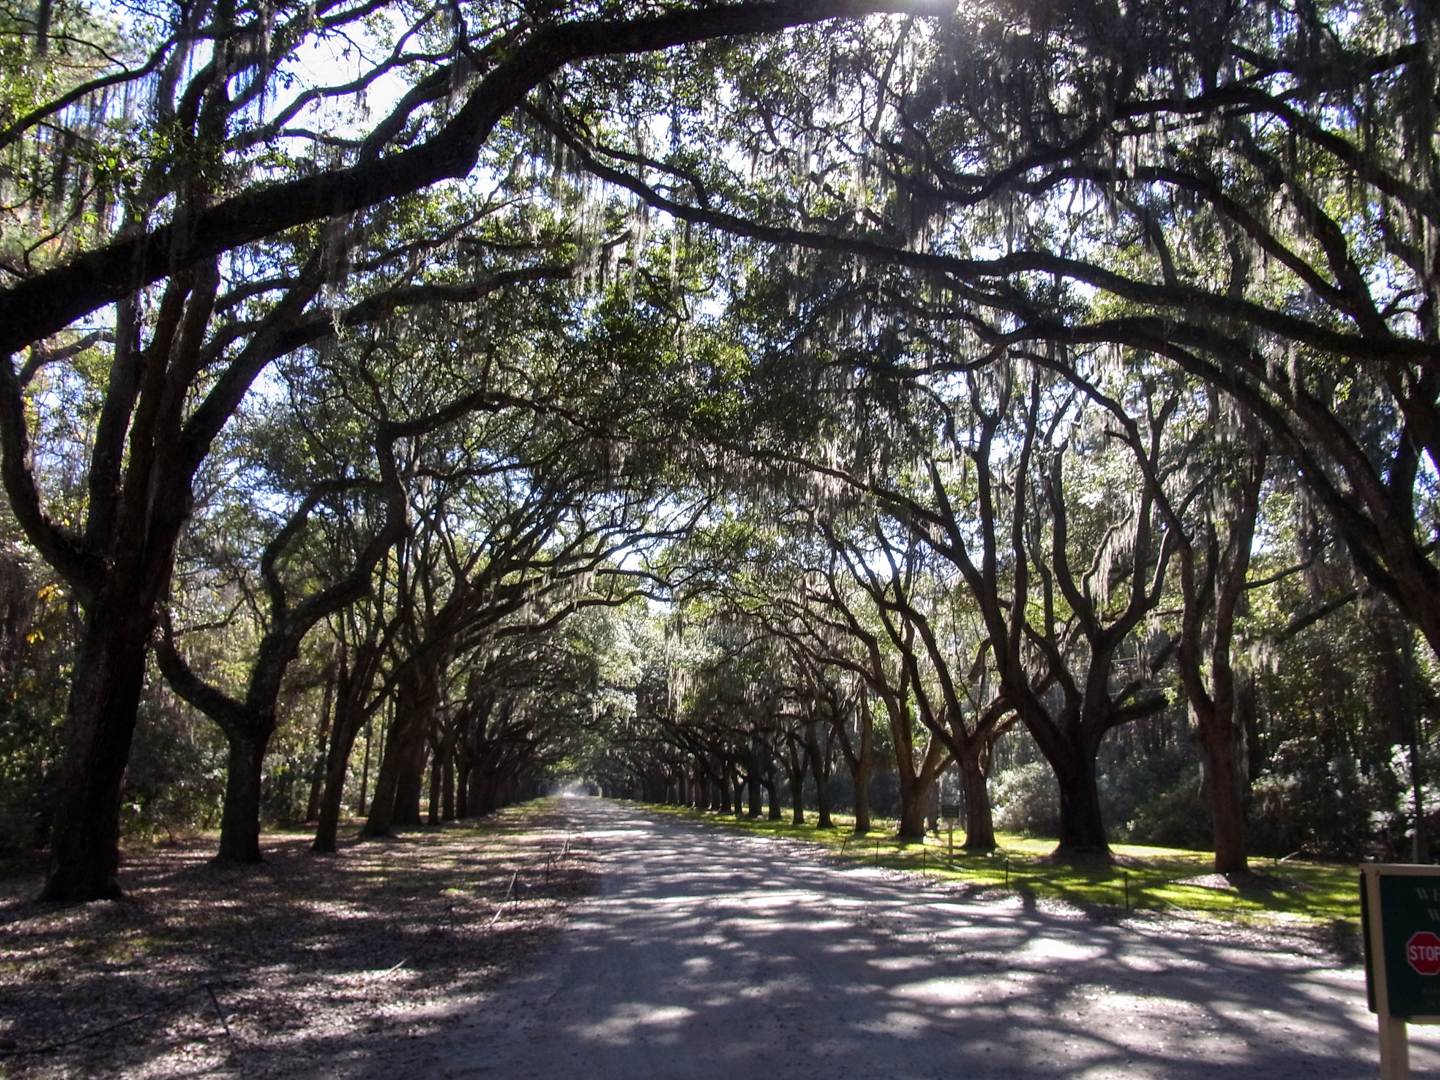 The avenue of live oaks and Spanish moss leading to the tabby ruins of Wormsloe, the colonial estate of Noble Jones (1702-1775) one of the earliest settlers of the Savannah area.